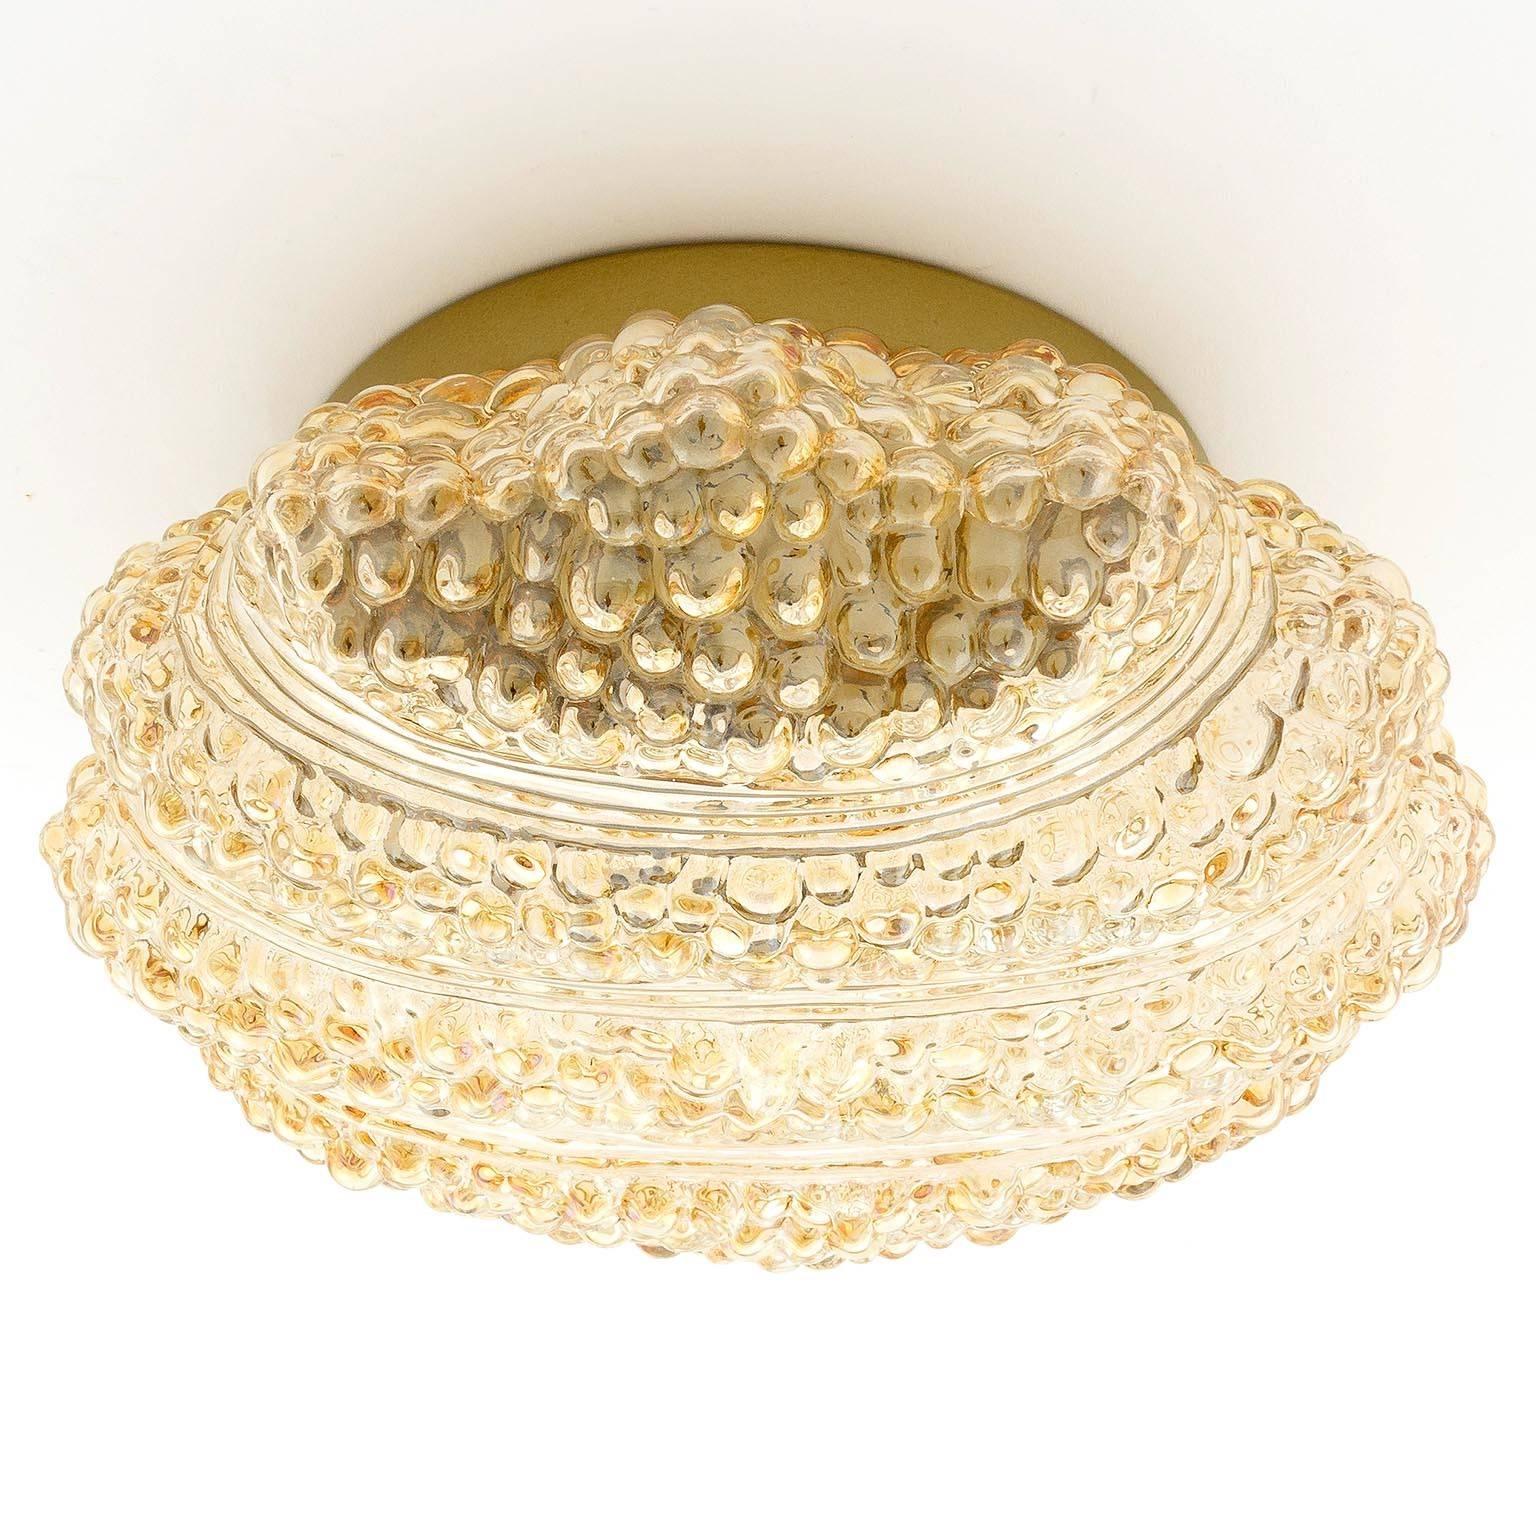 Painted Flush Mount Light or Sconce, Amber Tone Bubble Glass, 1970